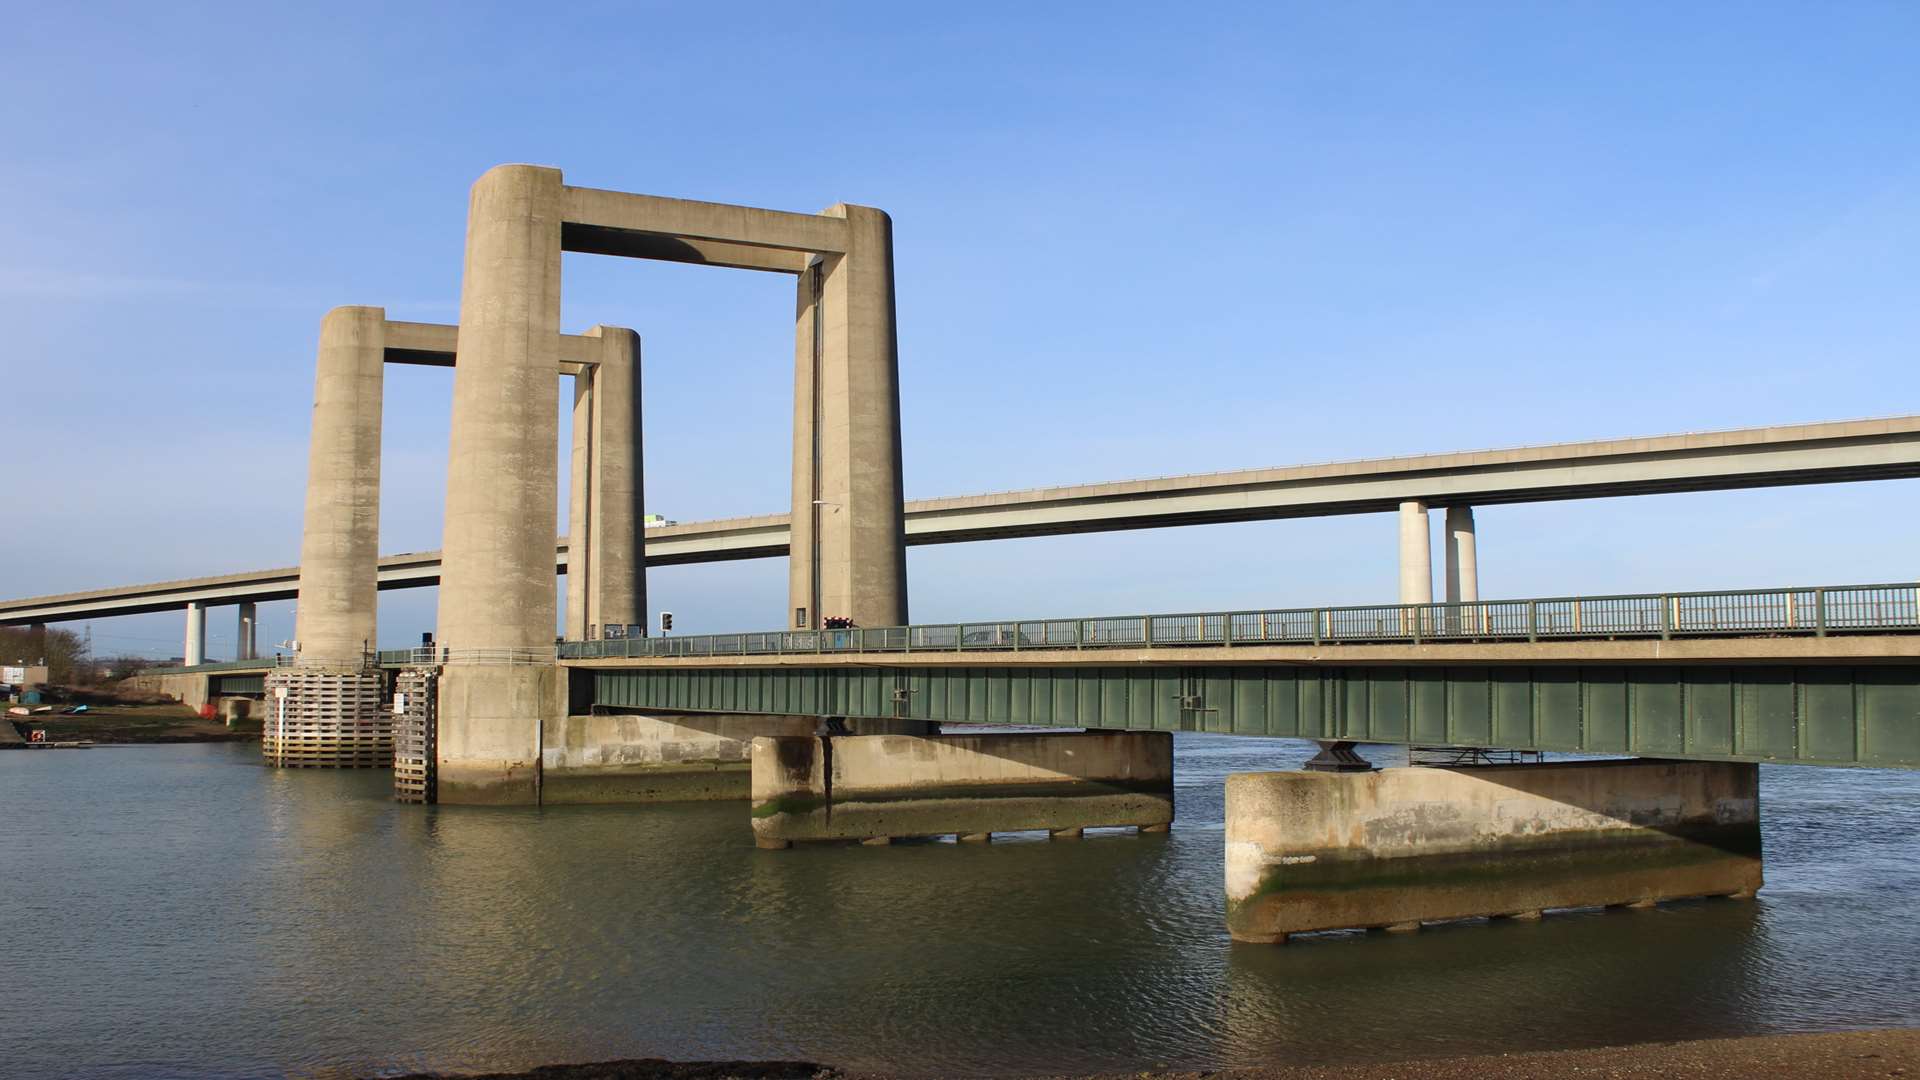 The Kingsferry Bridge and Sheppey Crossing